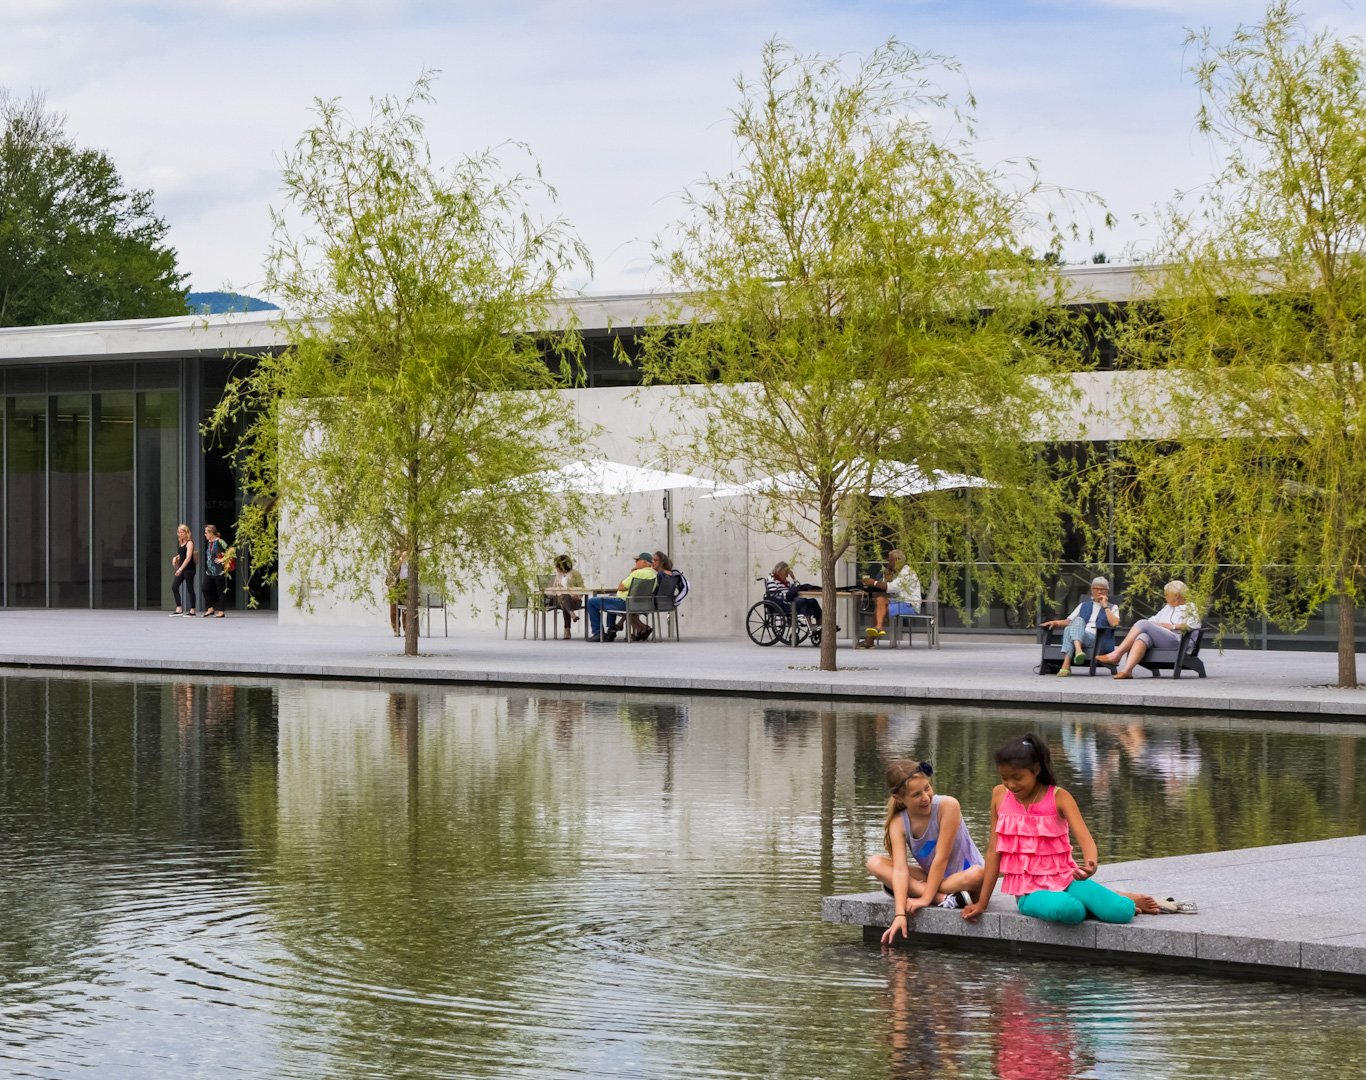 Multiple people of different ability levels sit on a patio in front of a reflecting pool